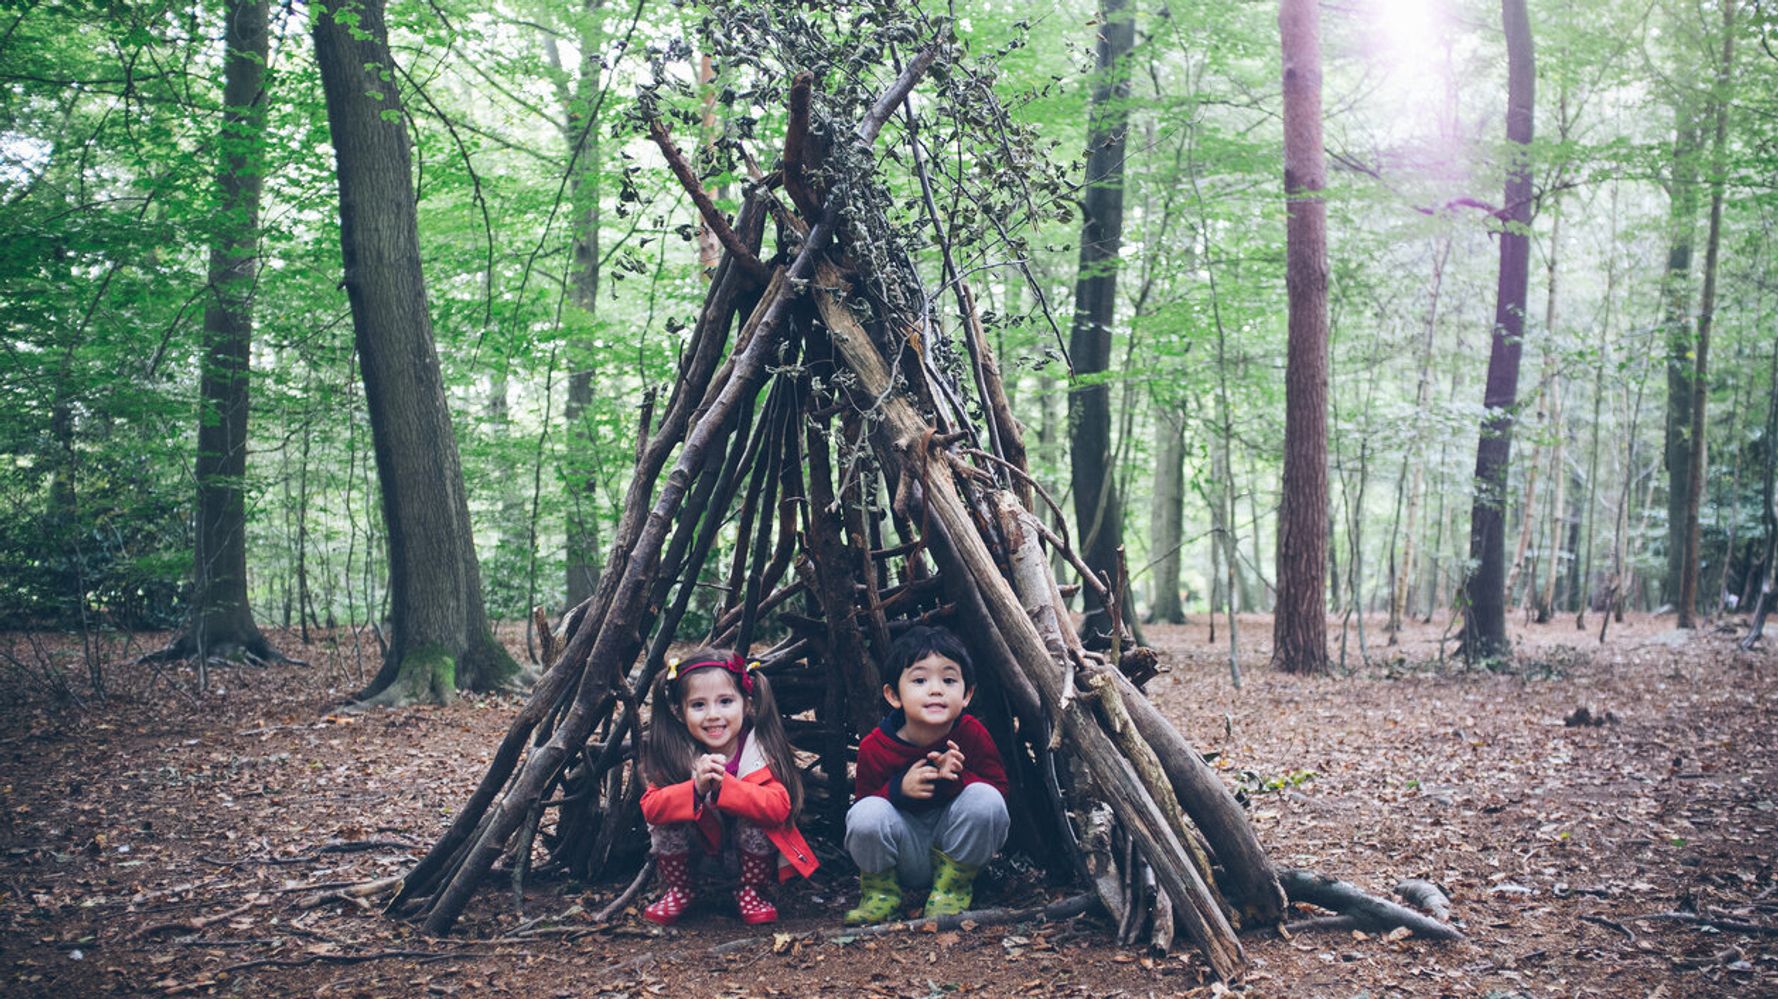 Forest Schools In Canada: What Are They What The Benefits? | HuffPost null